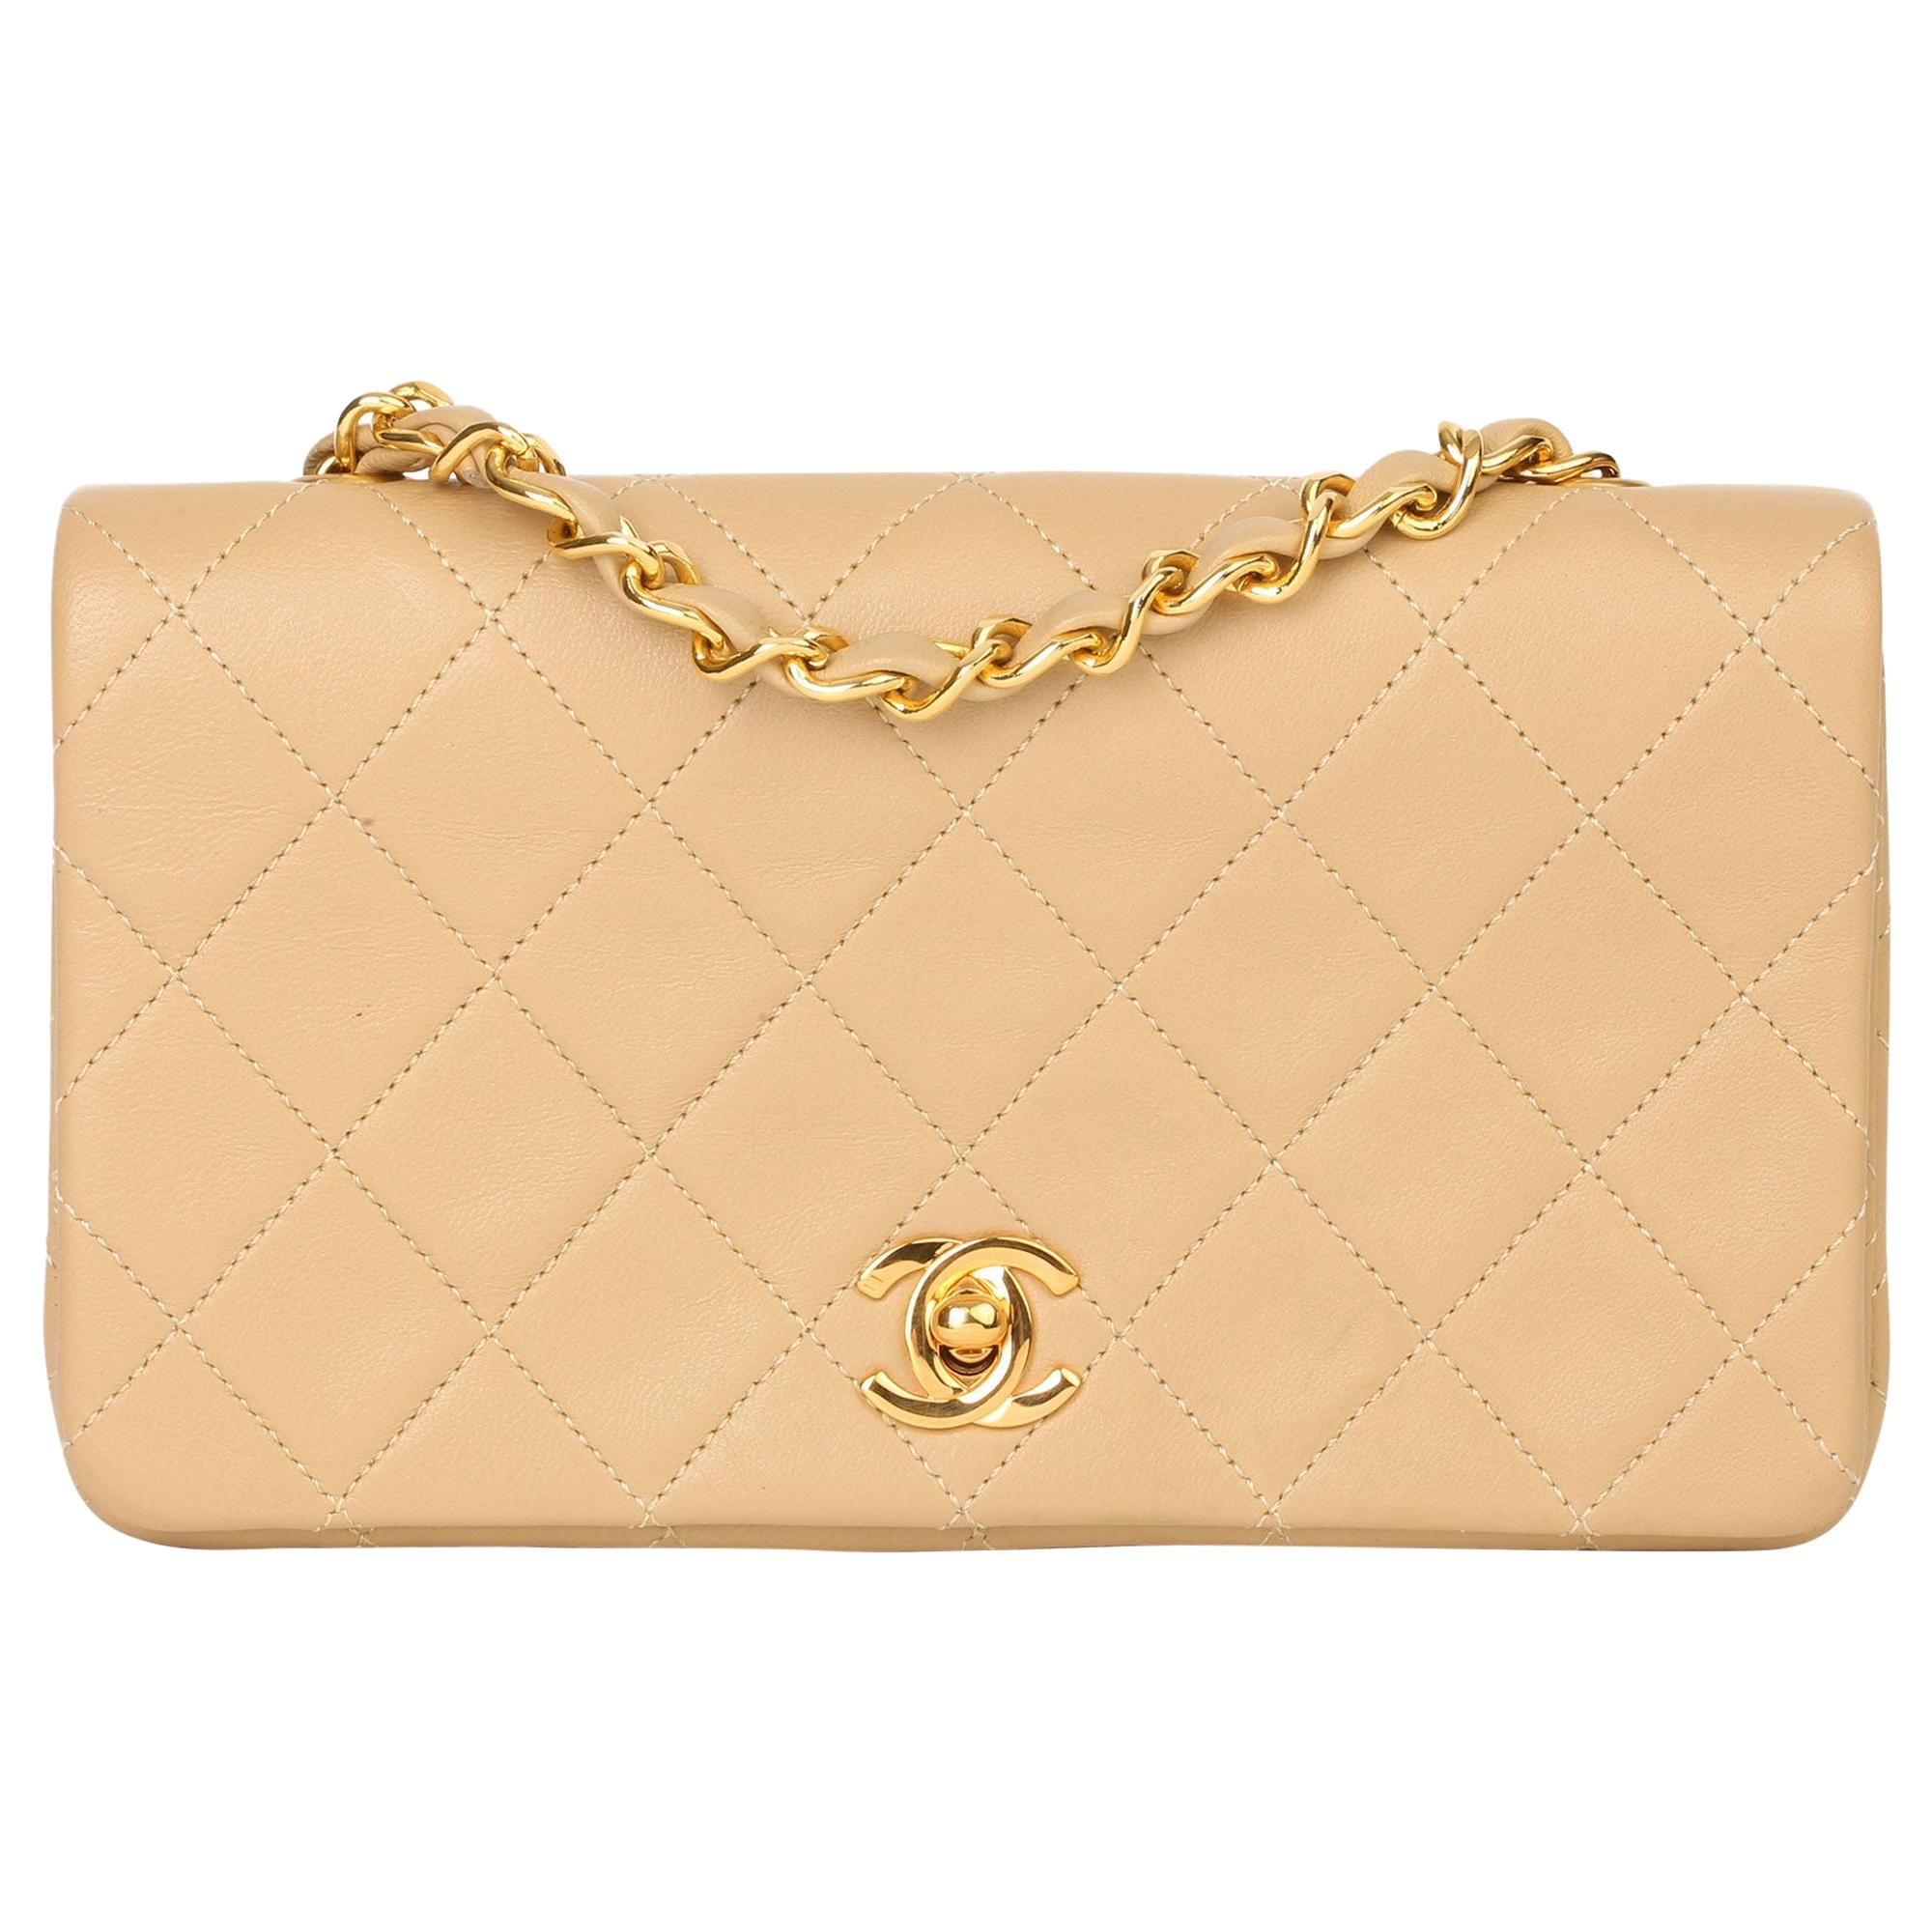 Chanel Beige Quilted Lambskin Vintage Mini Flap Bag